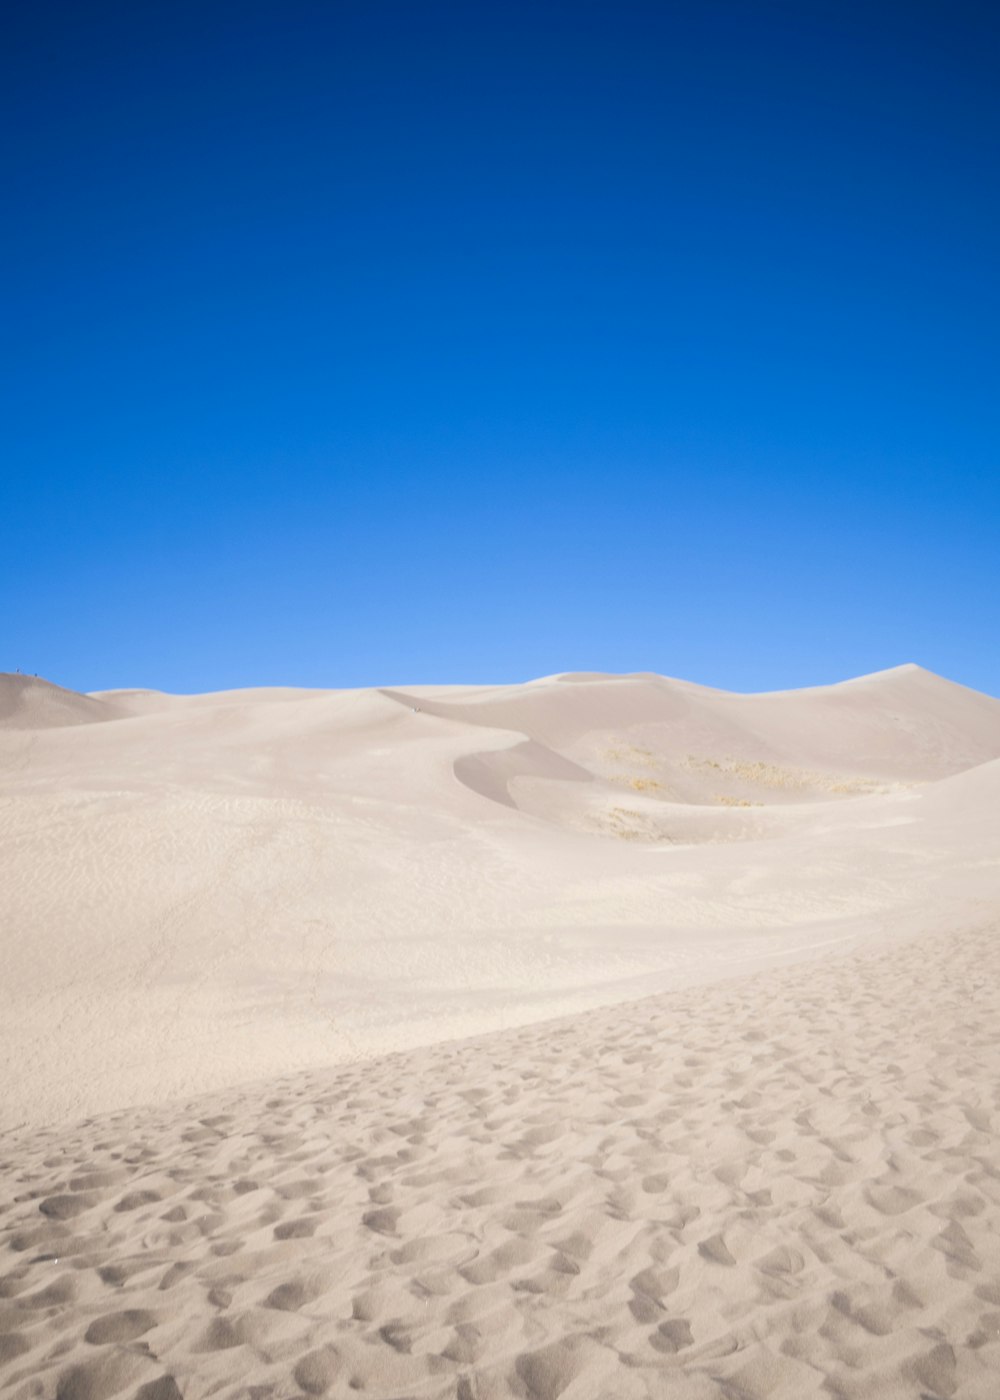 a sandy area with a blue sky in the background